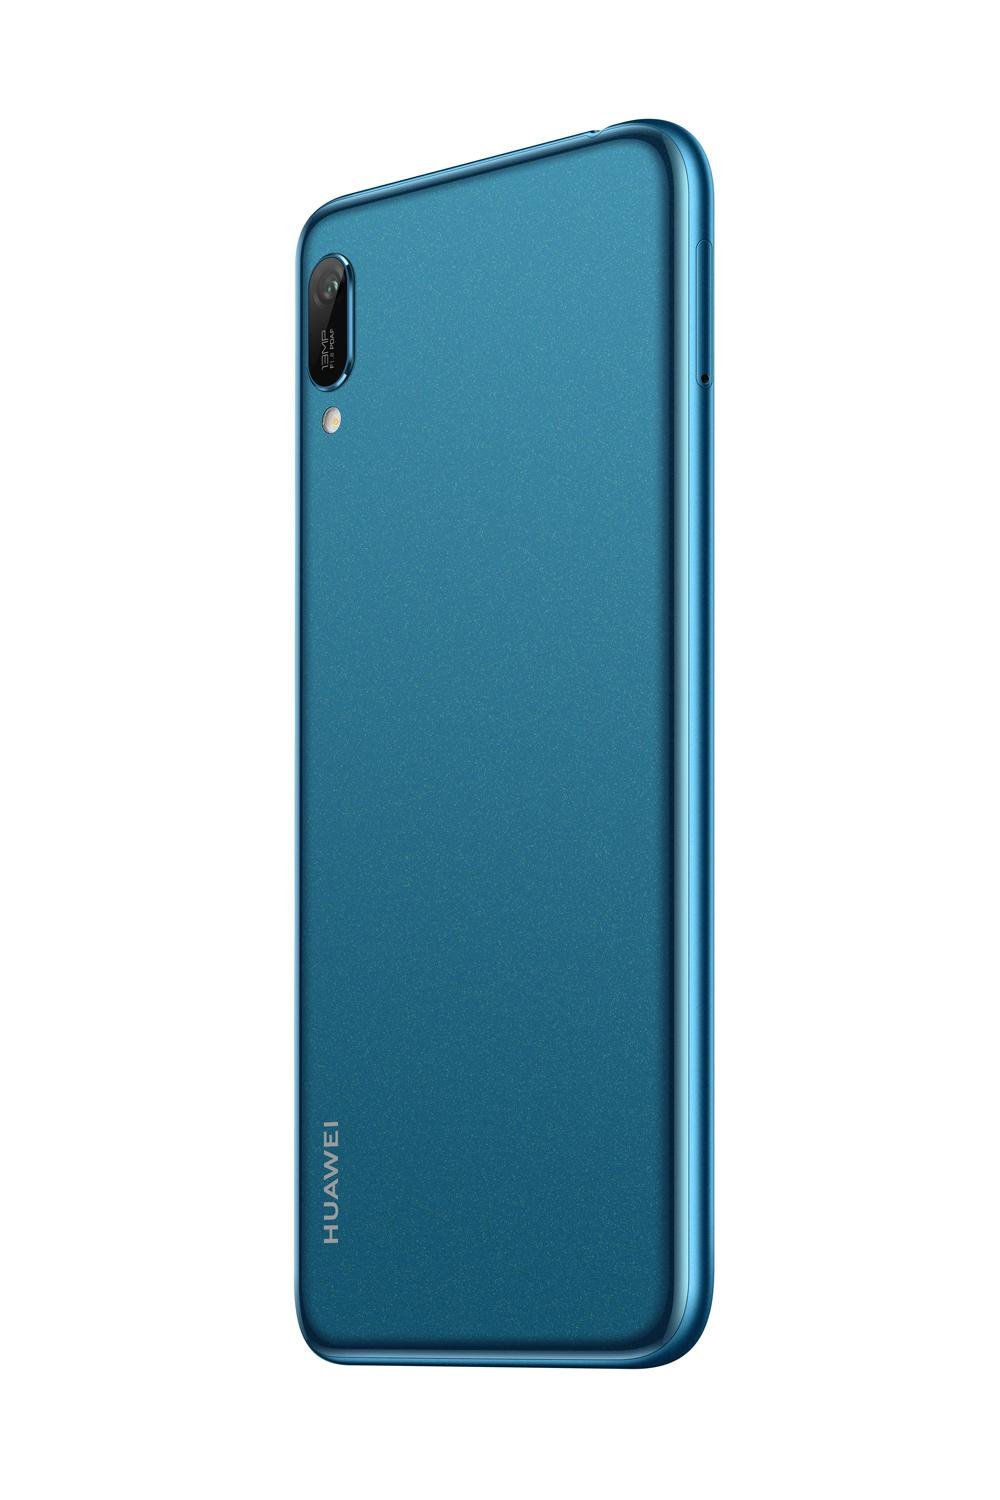 Huawei Pro (2019) specs, review, release - PhonesData